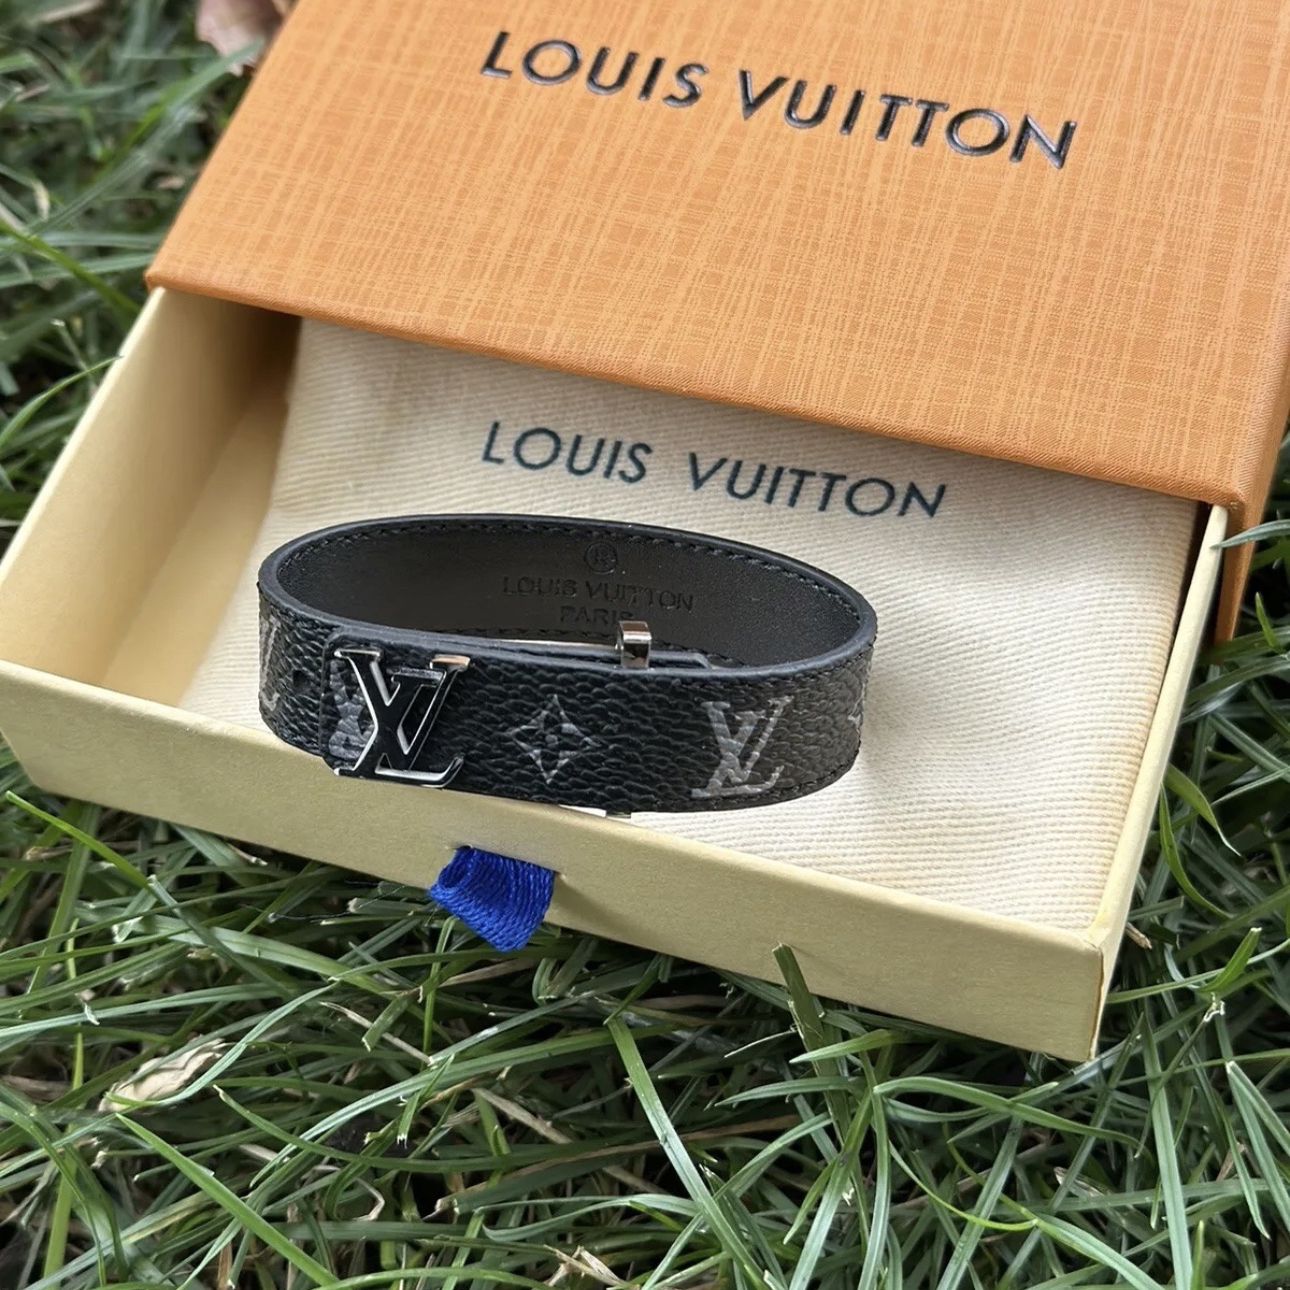 Authentic and Rare LOUIS VUITTON Hockenheim Bracelet for Sale in Los  Angeles, CA - OfferUp